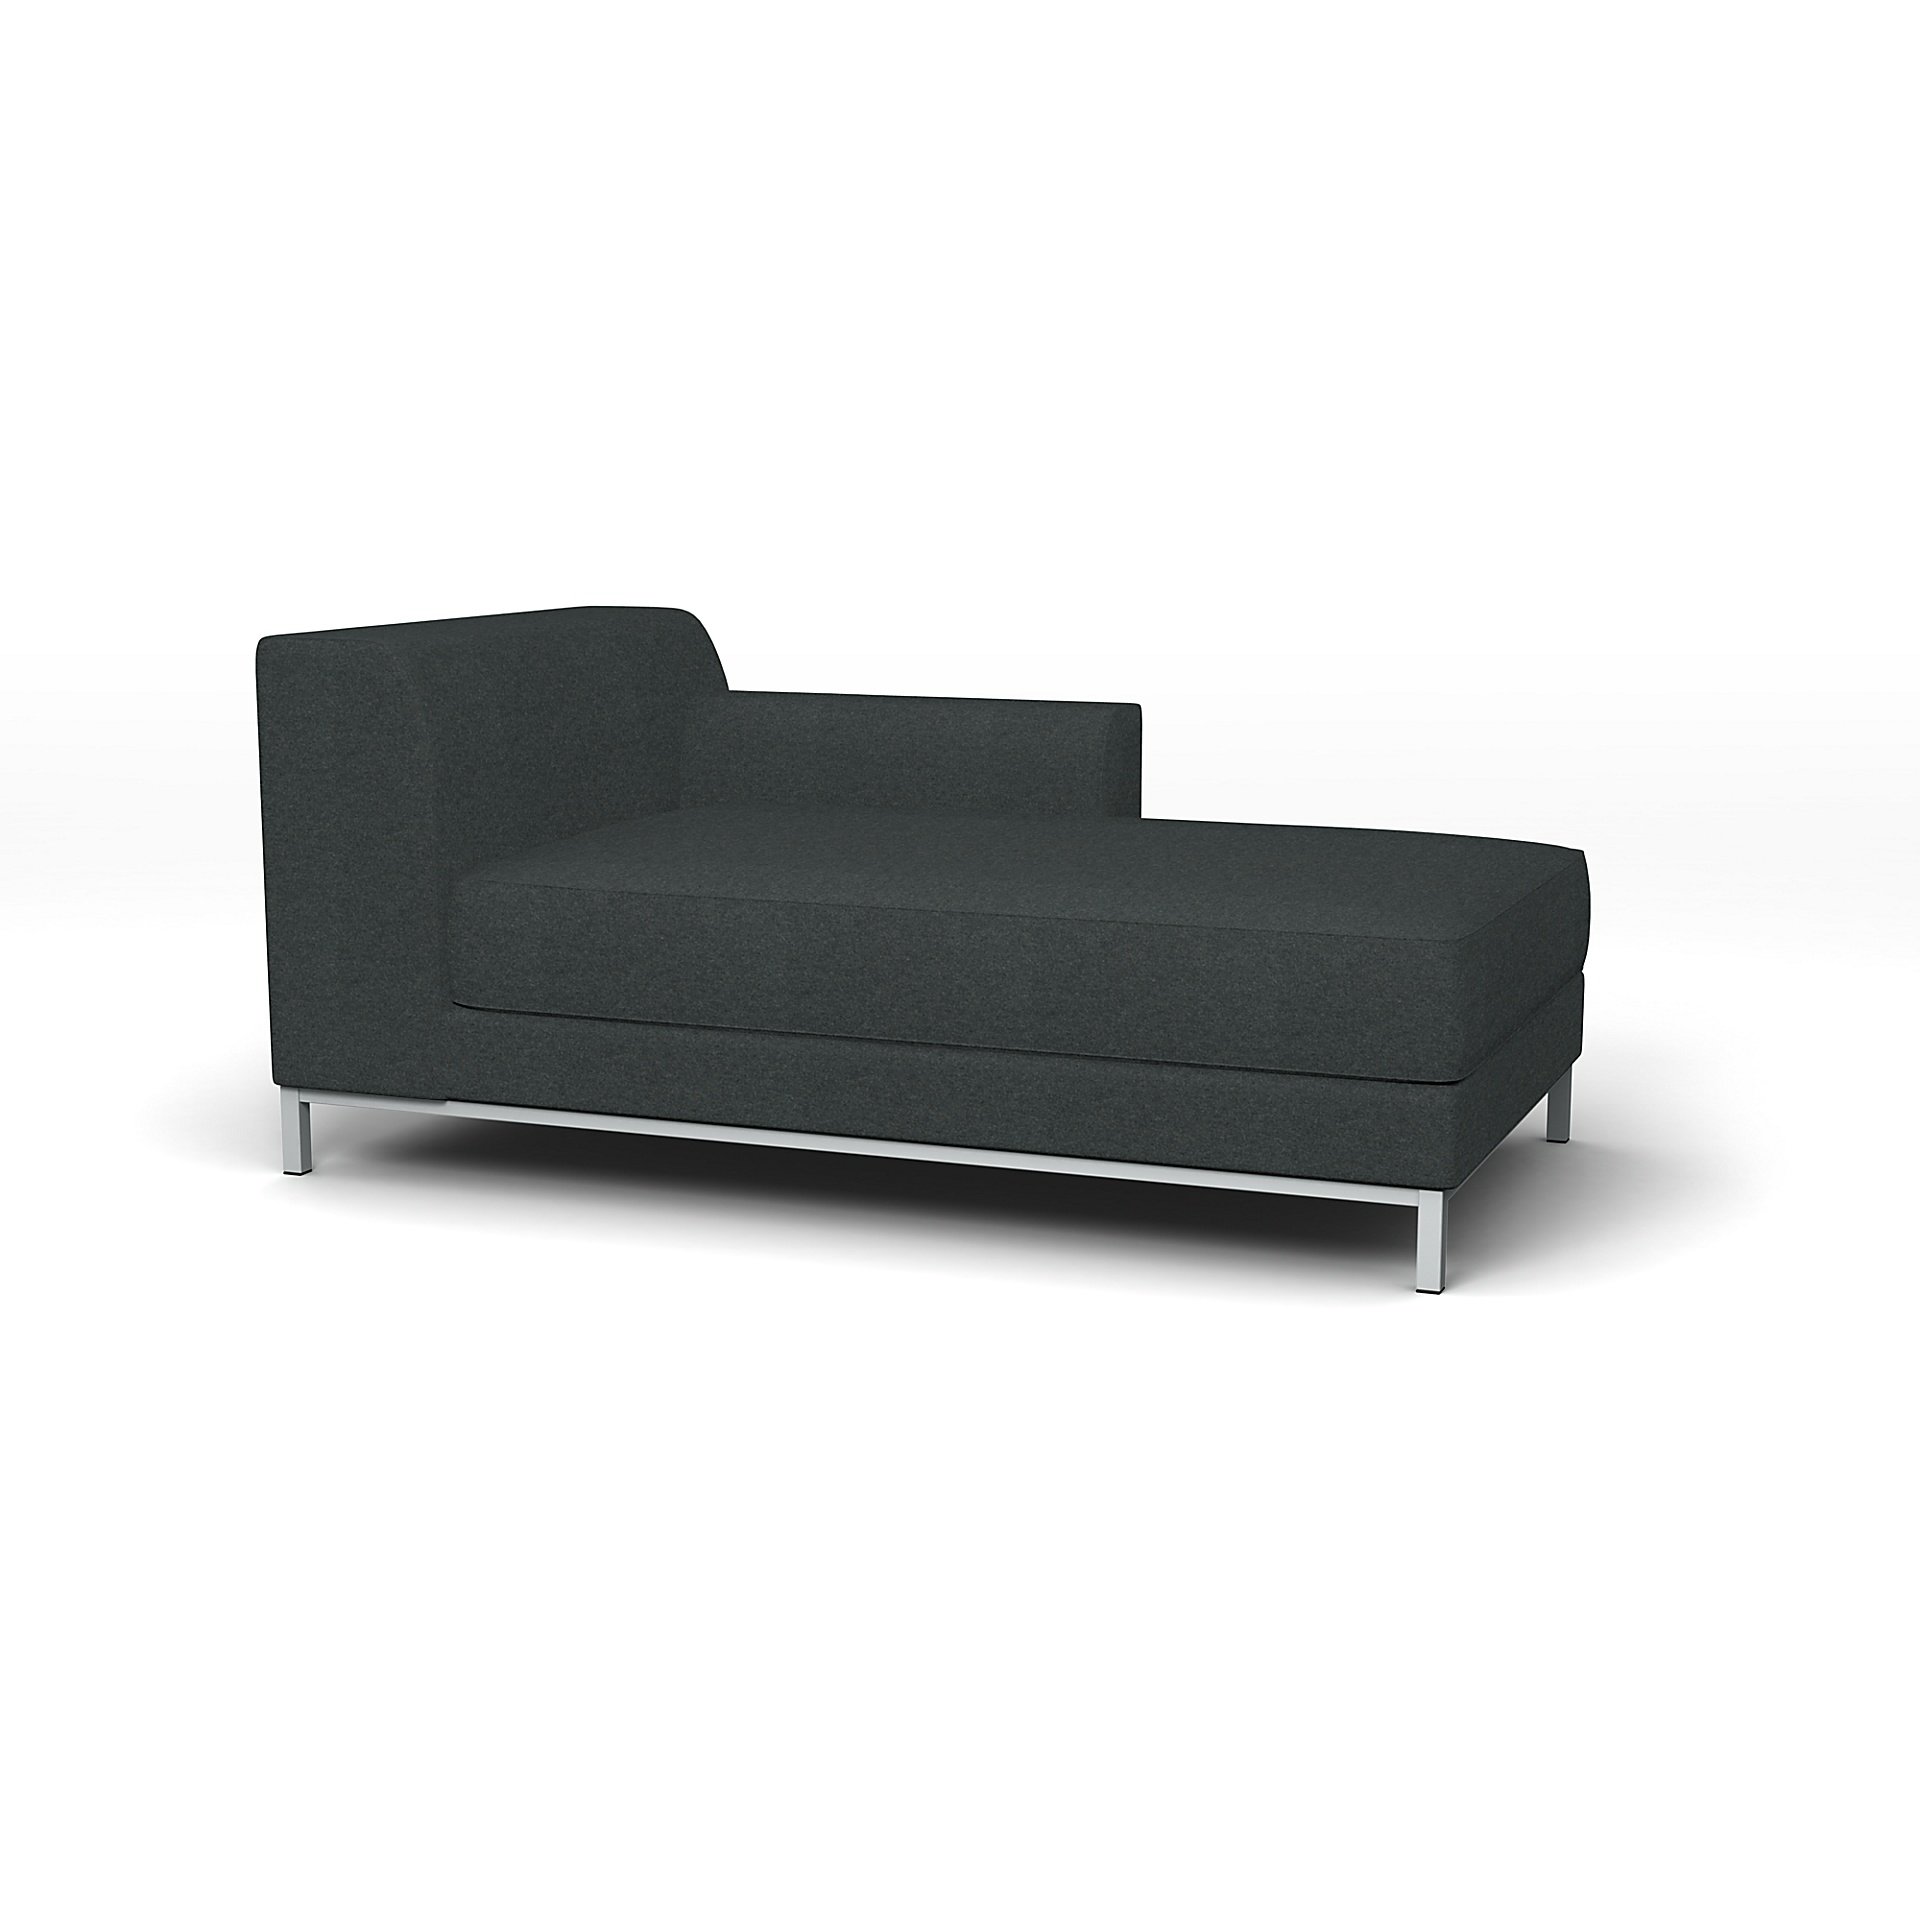 IKEA - Kramfors Chaise Longue with Right Arm Cover, Stone, Wool - Bemz